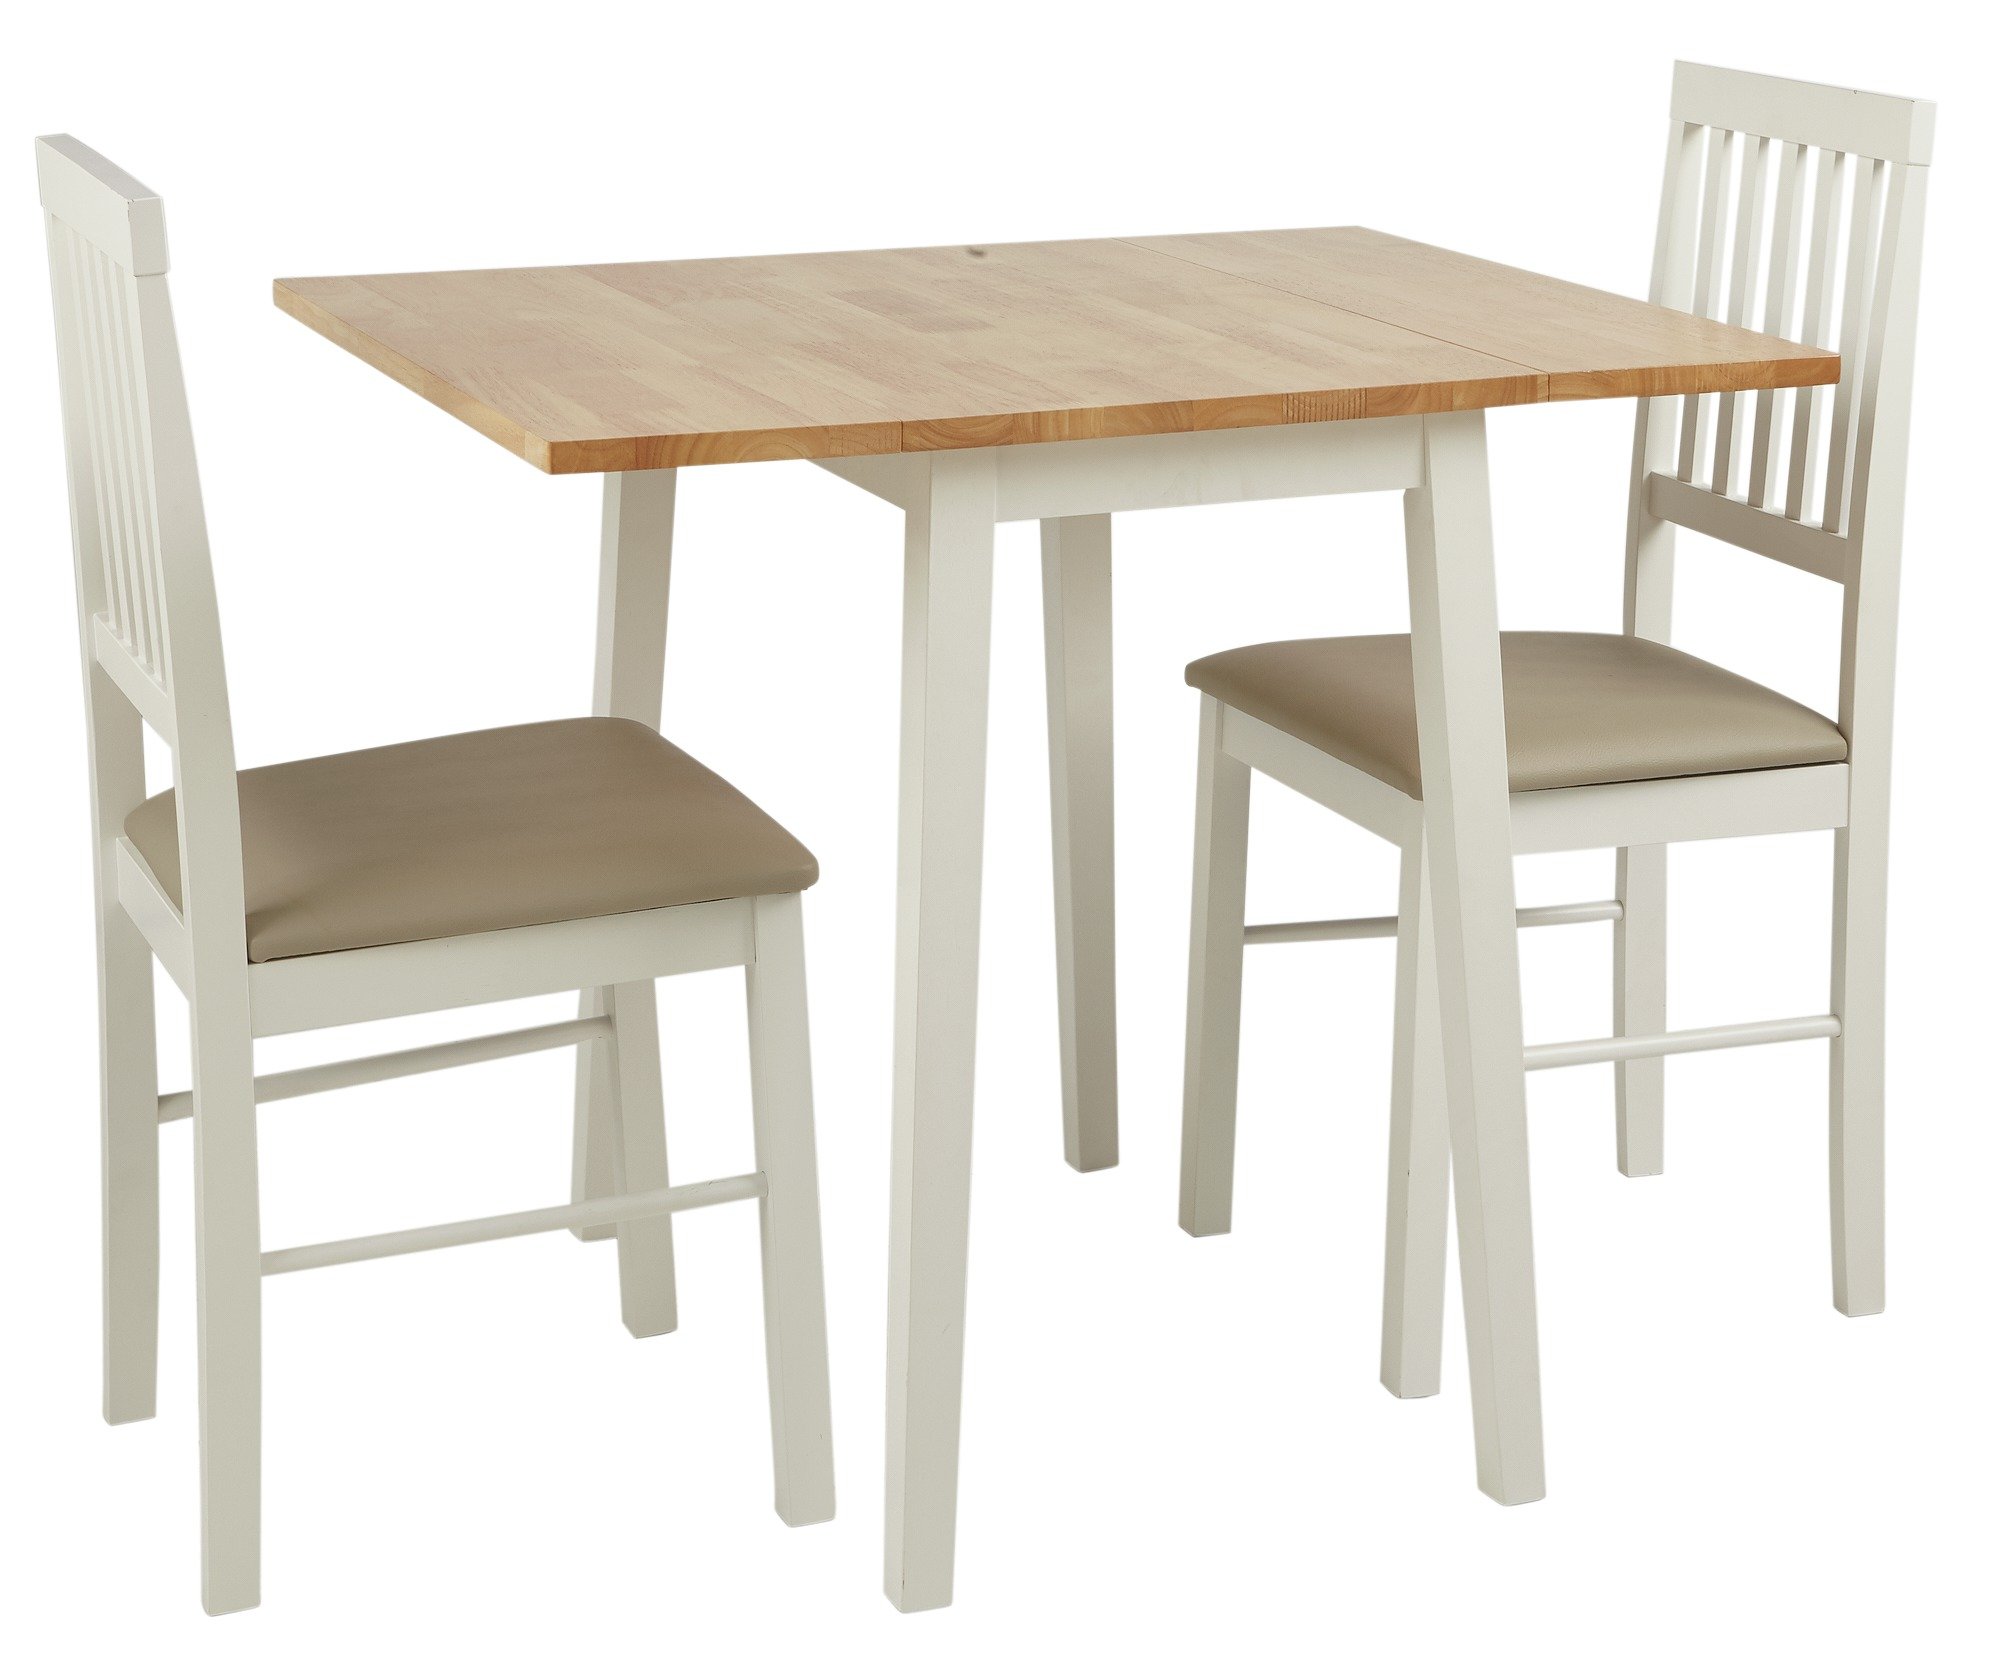 Argos Home Kendal Extendable Wood Table & 2 Chairs -Two Tone (5727838